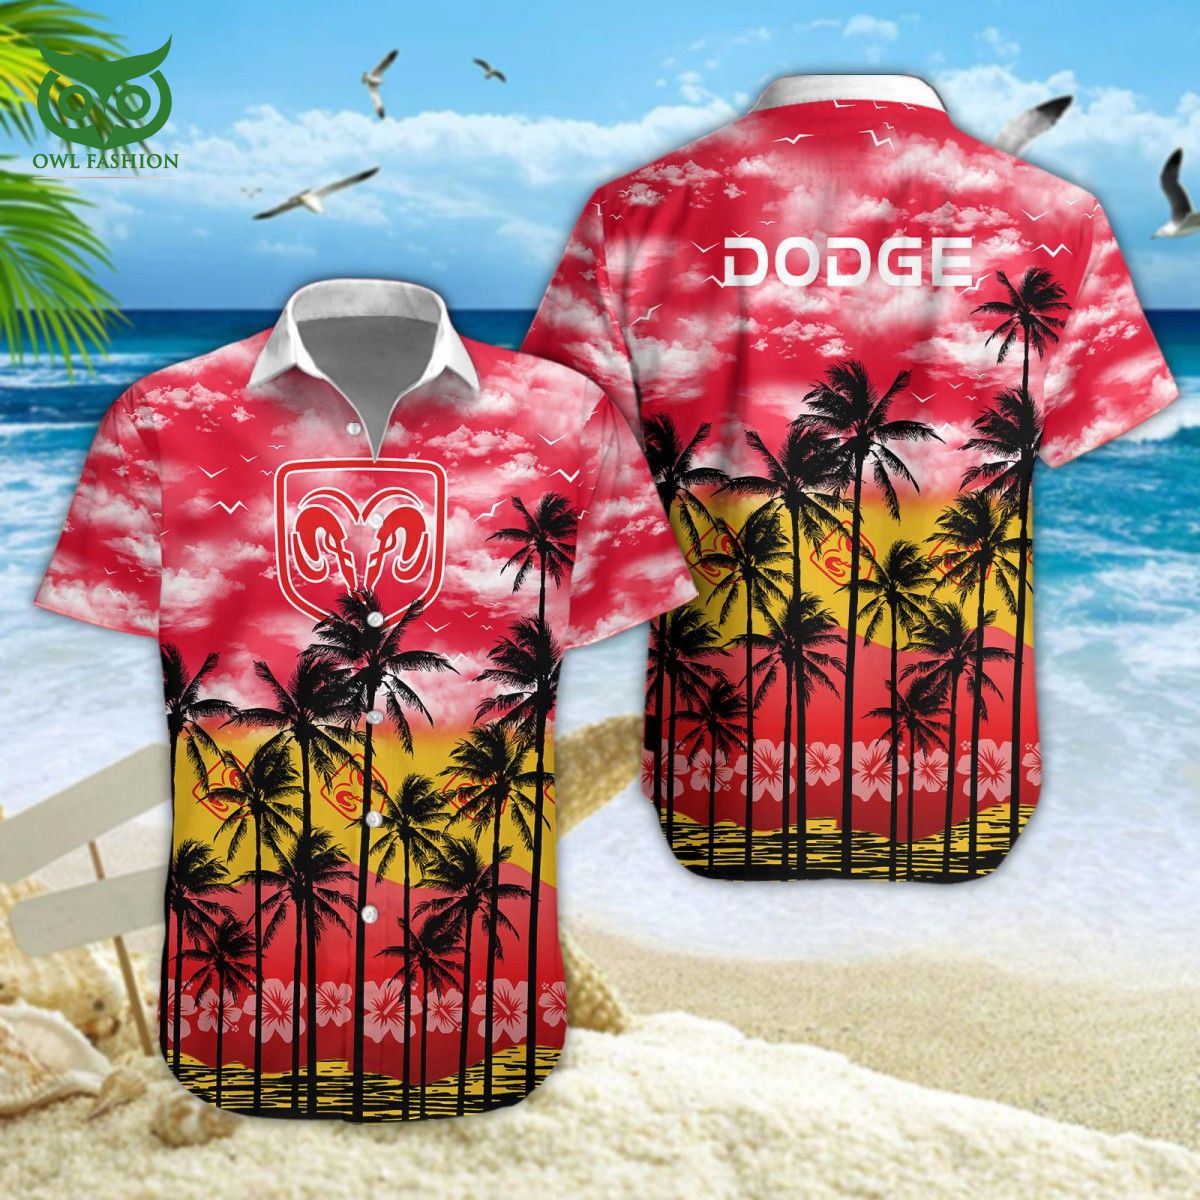 Dodge Luxury Car Brand Hawaiian Shirt Short My favourite picture of yours